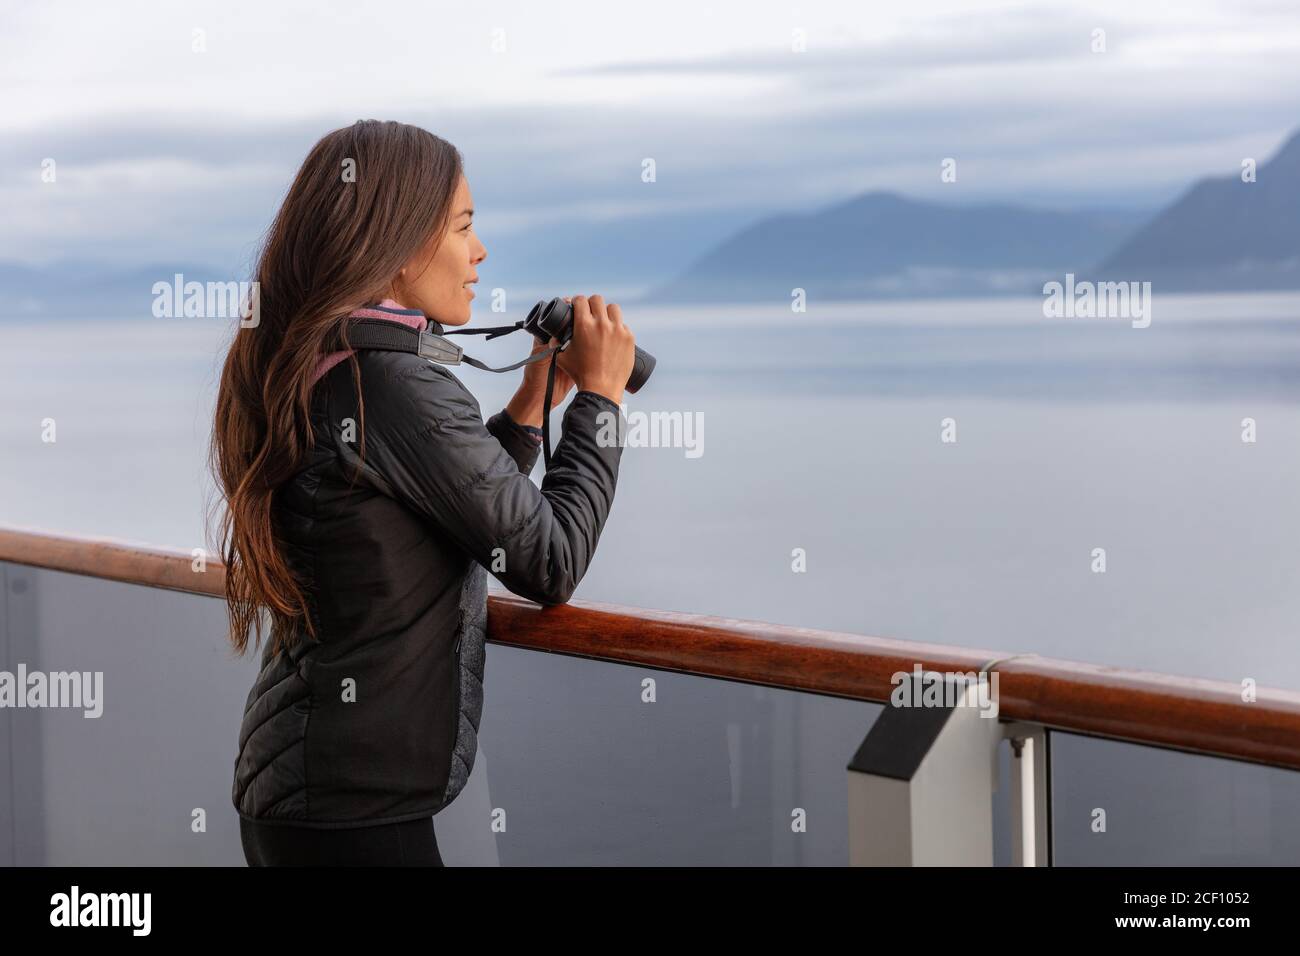 Alaska cruise woman on whale watching boat excursion tour looking at wildlife with binoculars. Tourist at inside passage Glacier Bay destination on Stock Photo